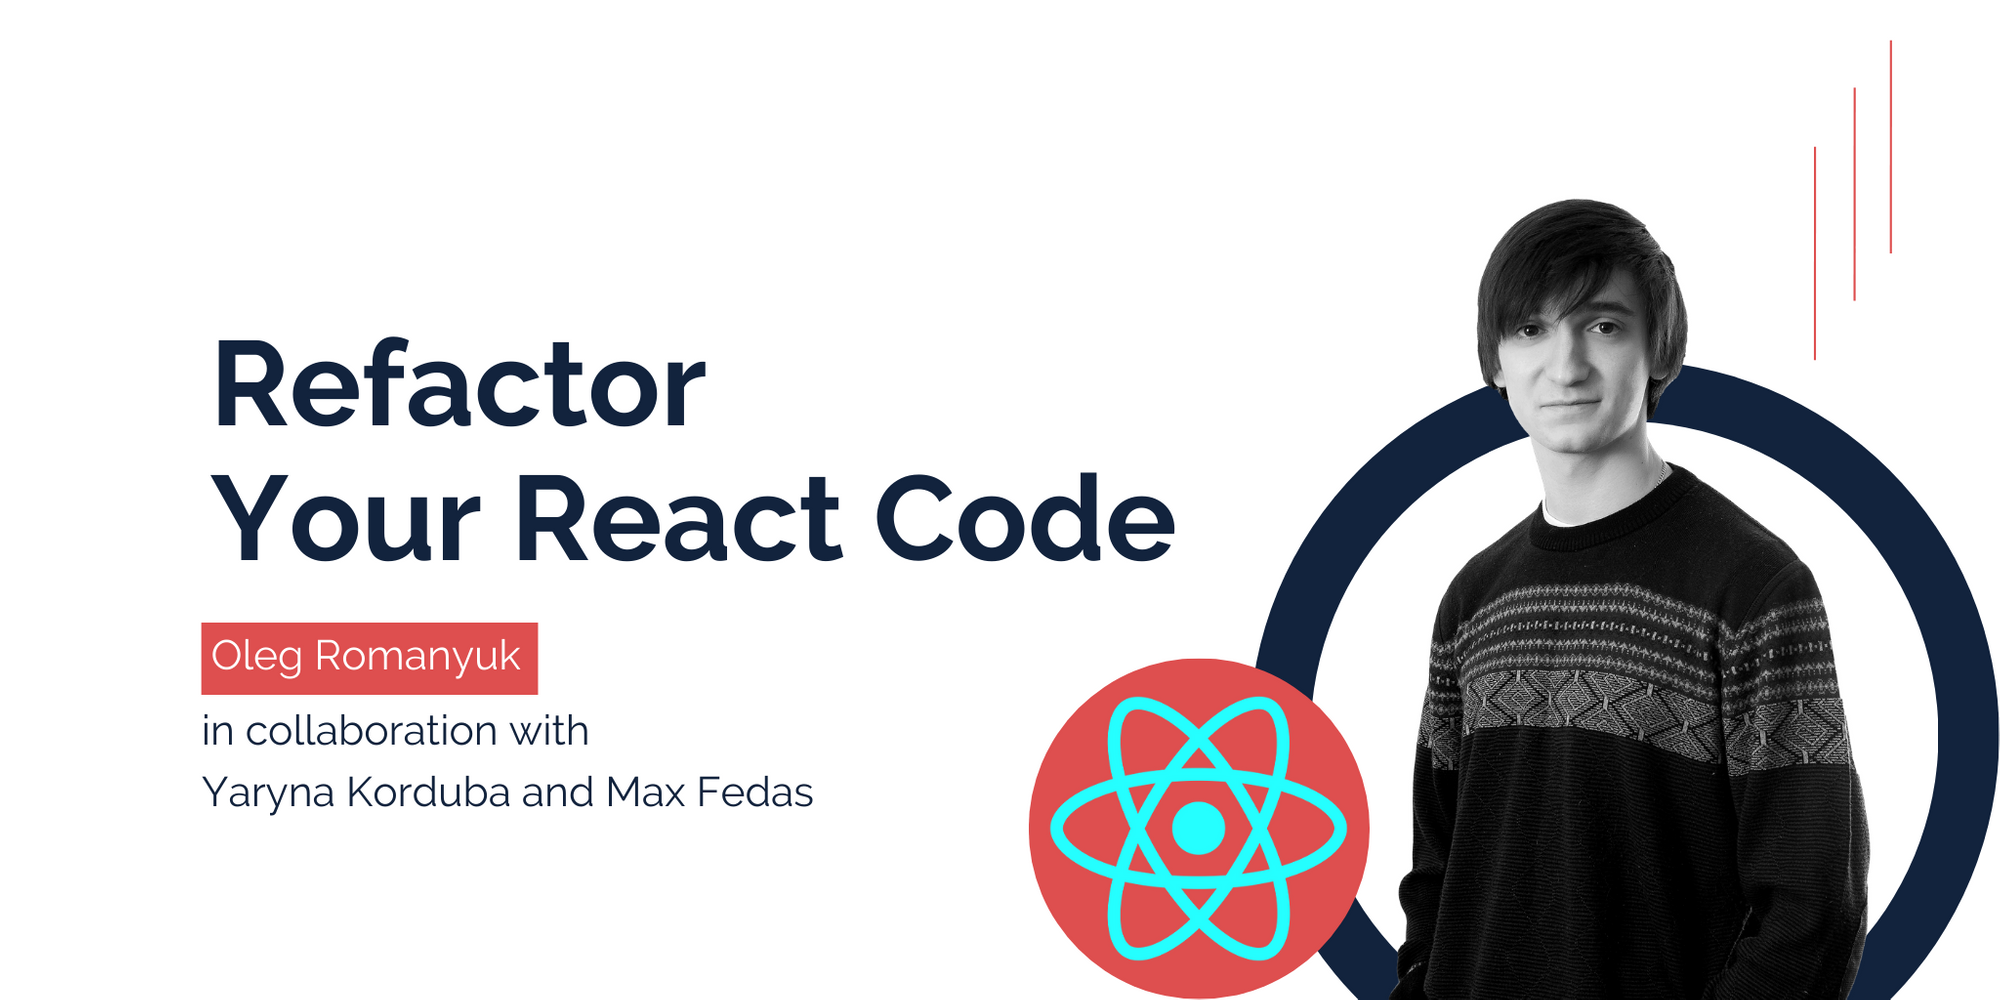 Why You Should Refactor Your Code